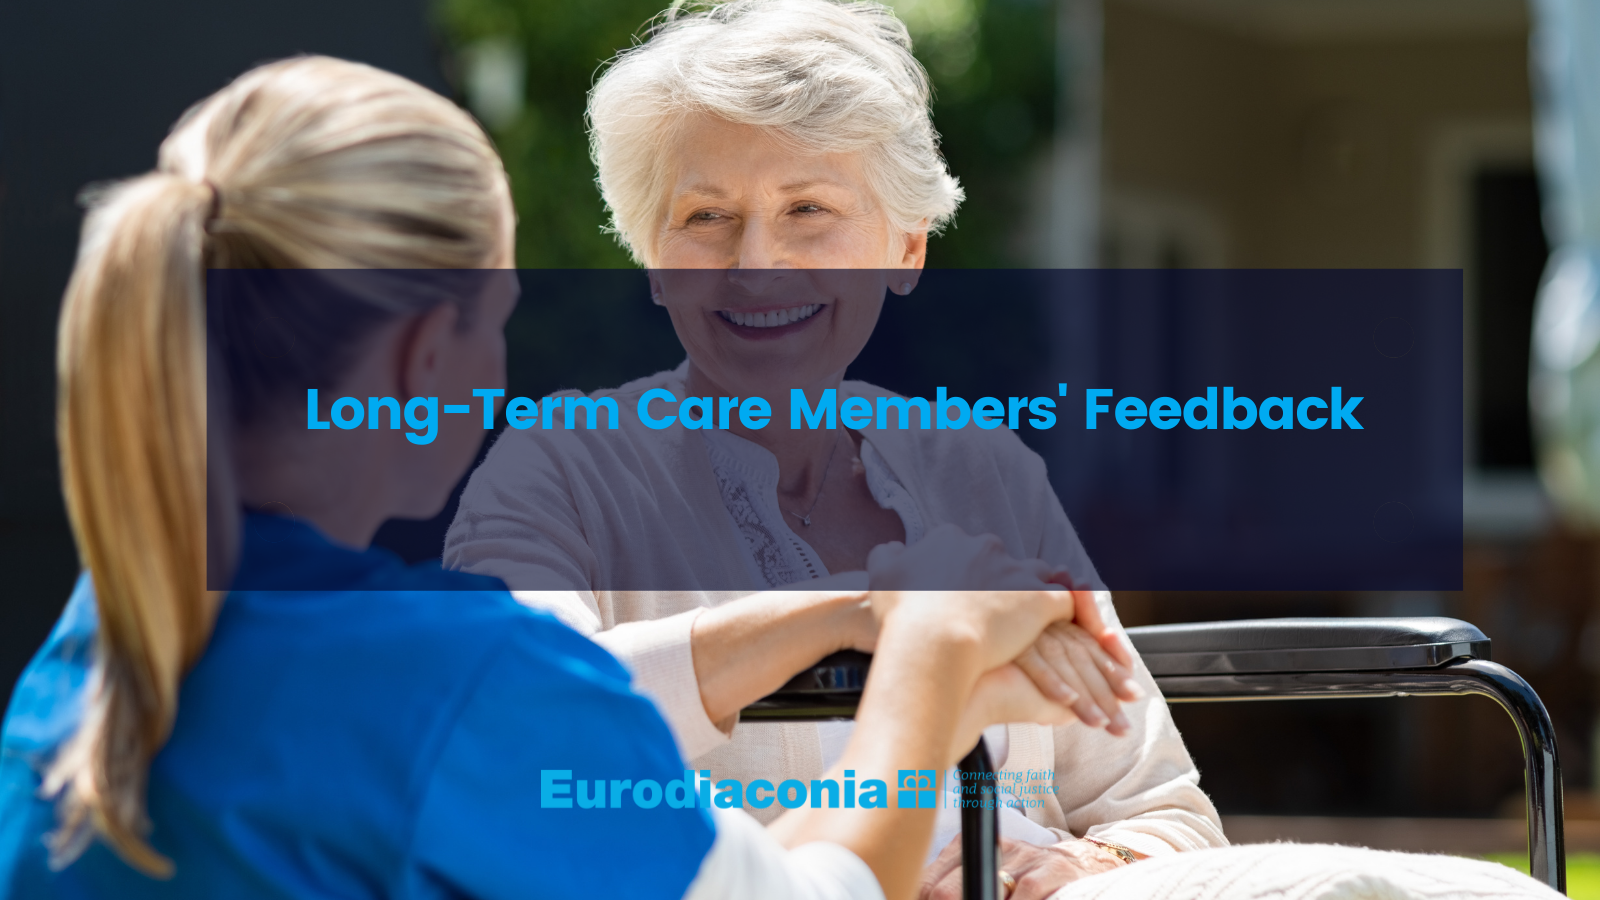 Long-Term Care Members' Feedback (for Members Only)